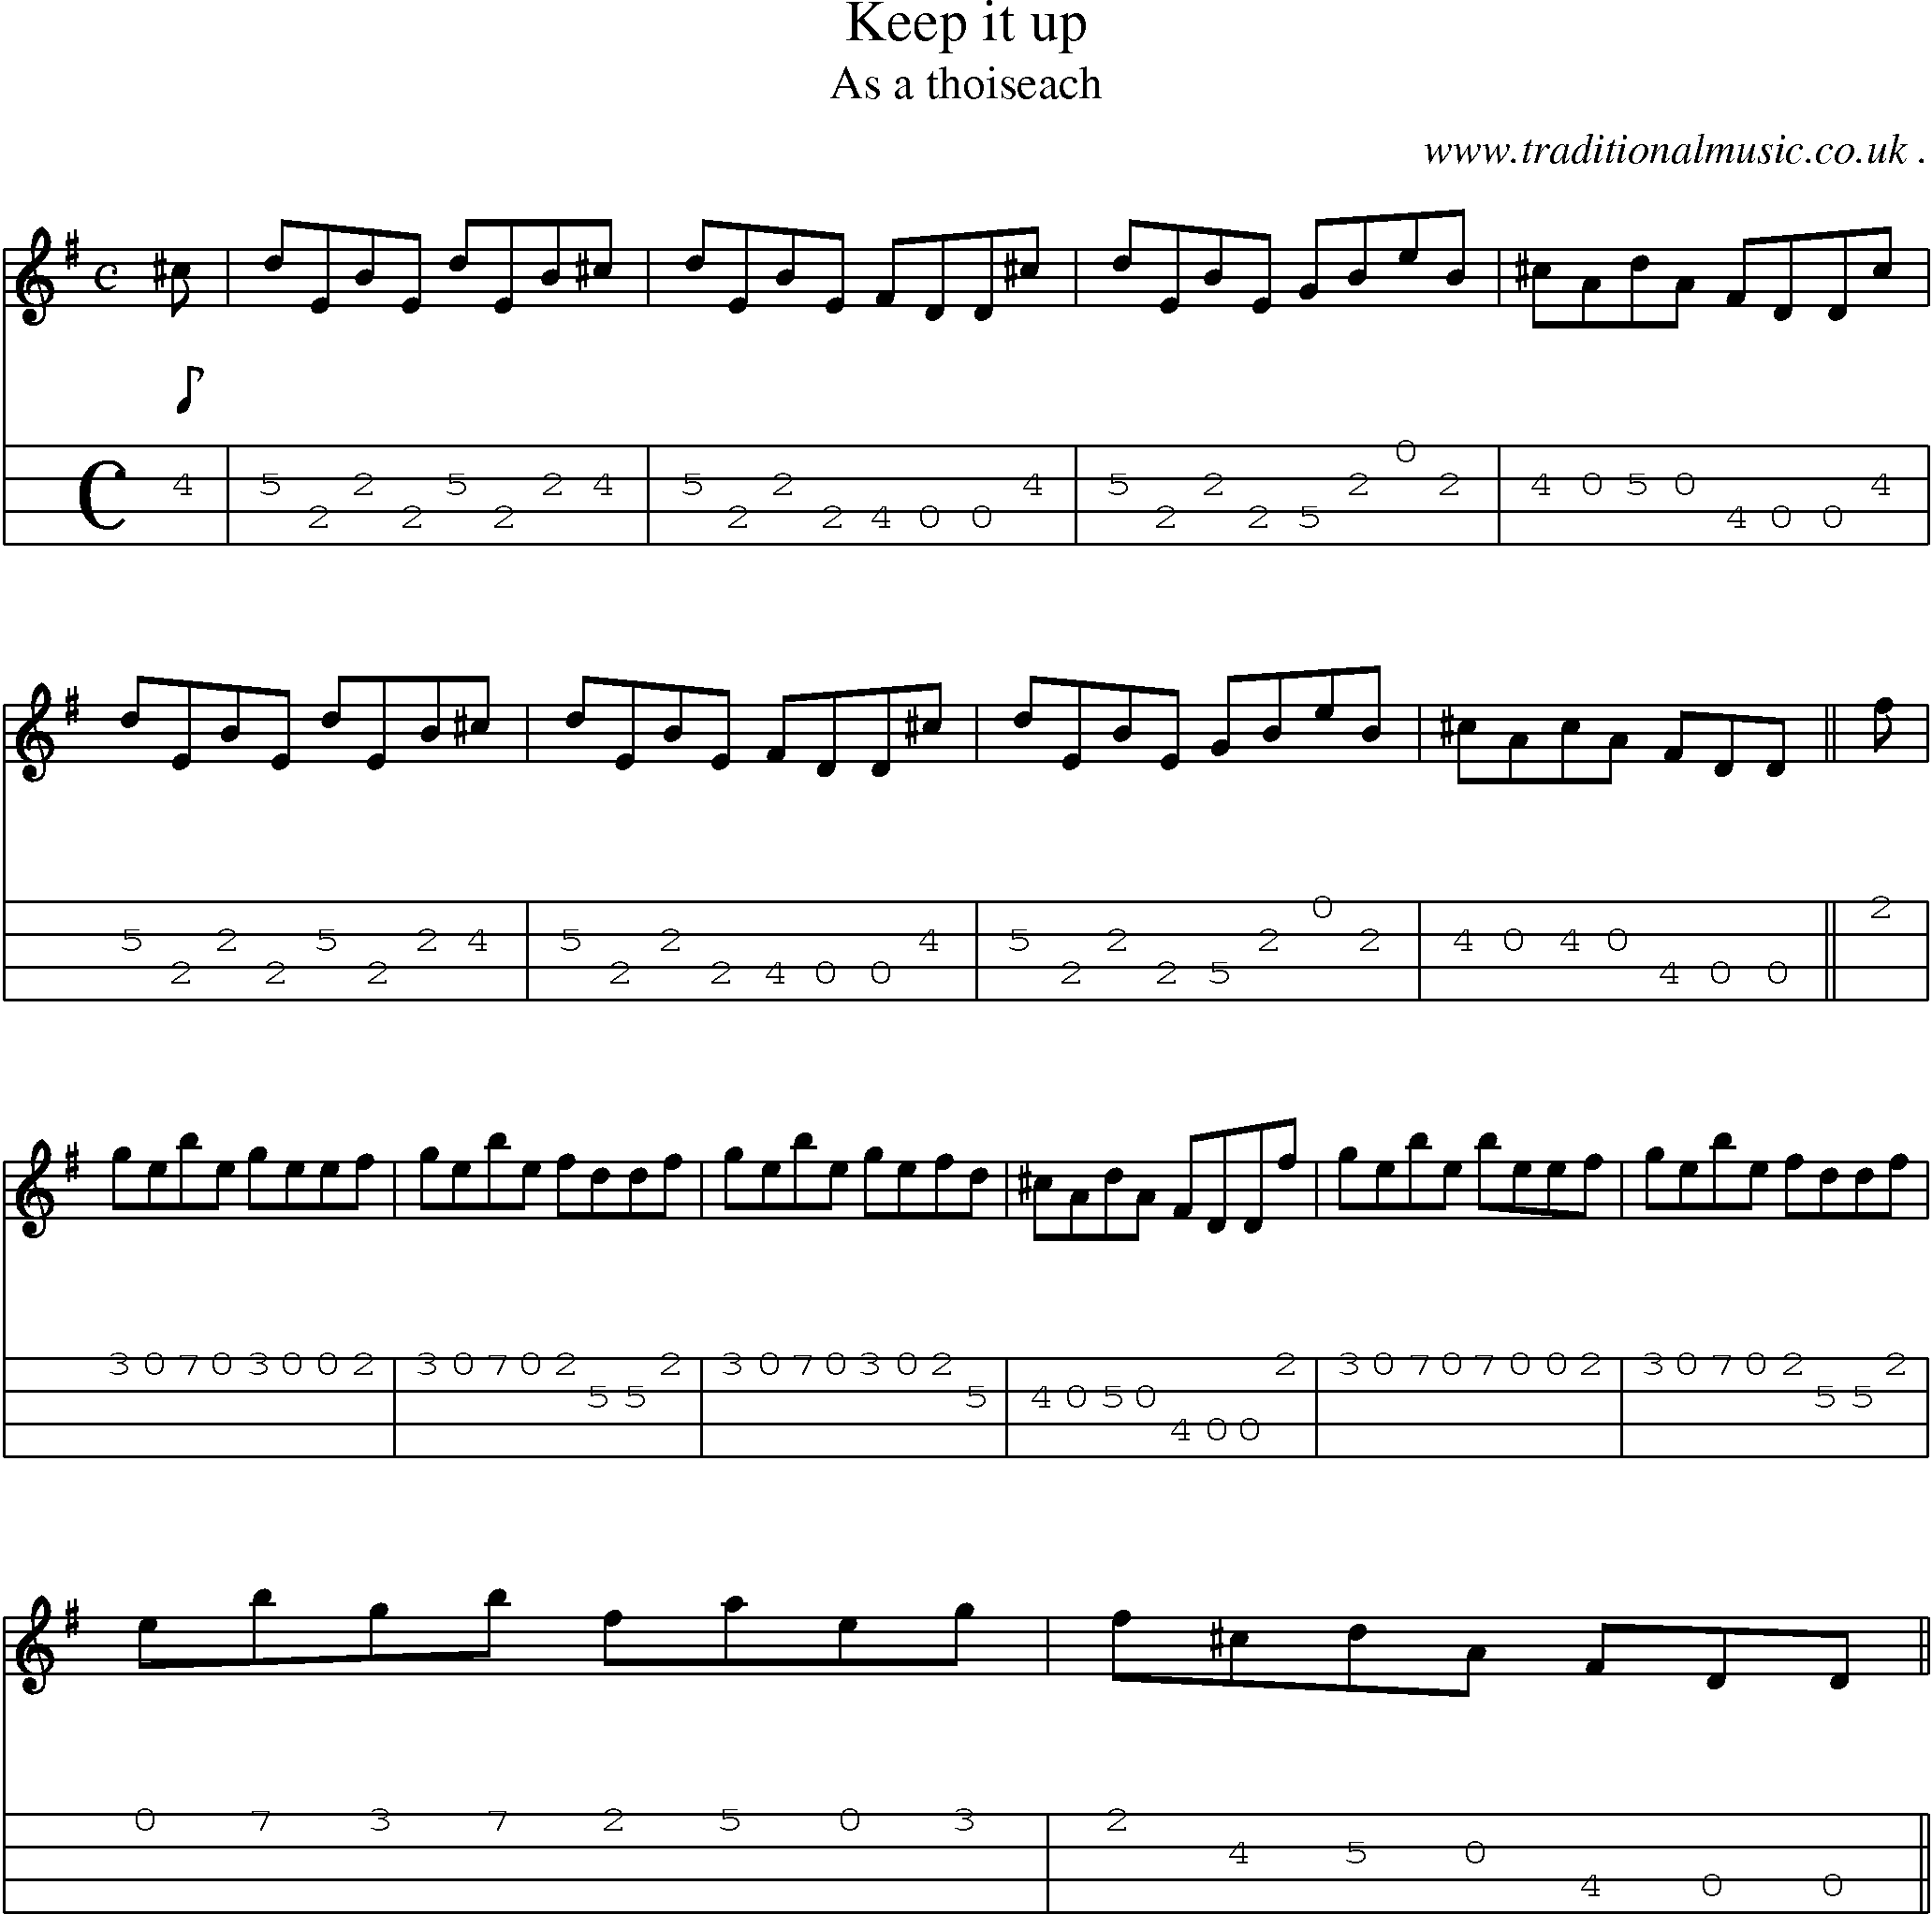 Sheet-music  score, Chords and Mandolin Tabs for Keep It Up